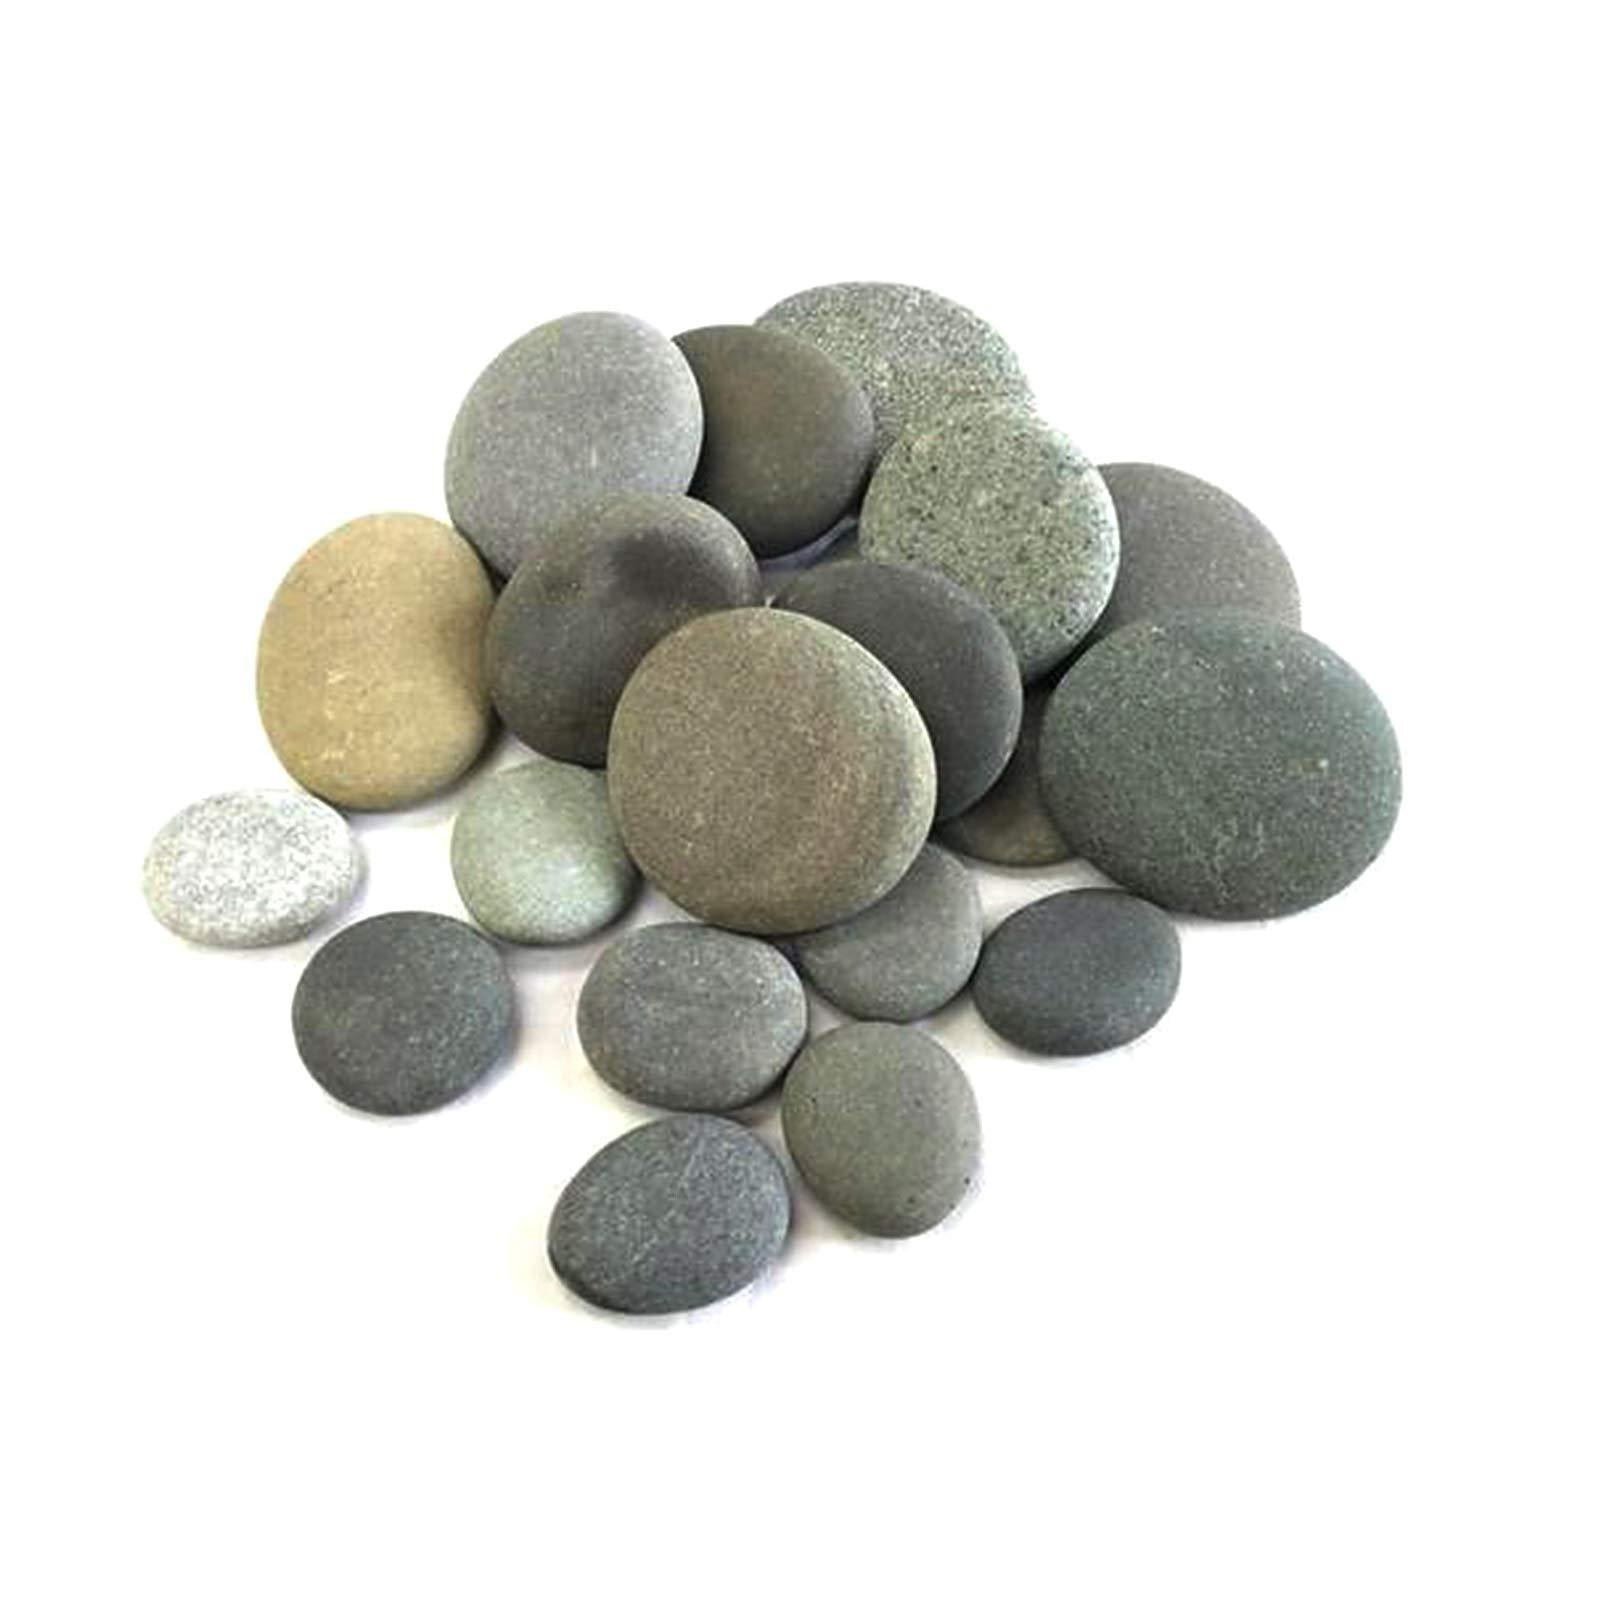 DALTACK 15PCS Large Rocks to Paint River Rocks for Painting 2-3 Inches DIY Flat  Stones to Paint Hand Selected Rocks for Painting